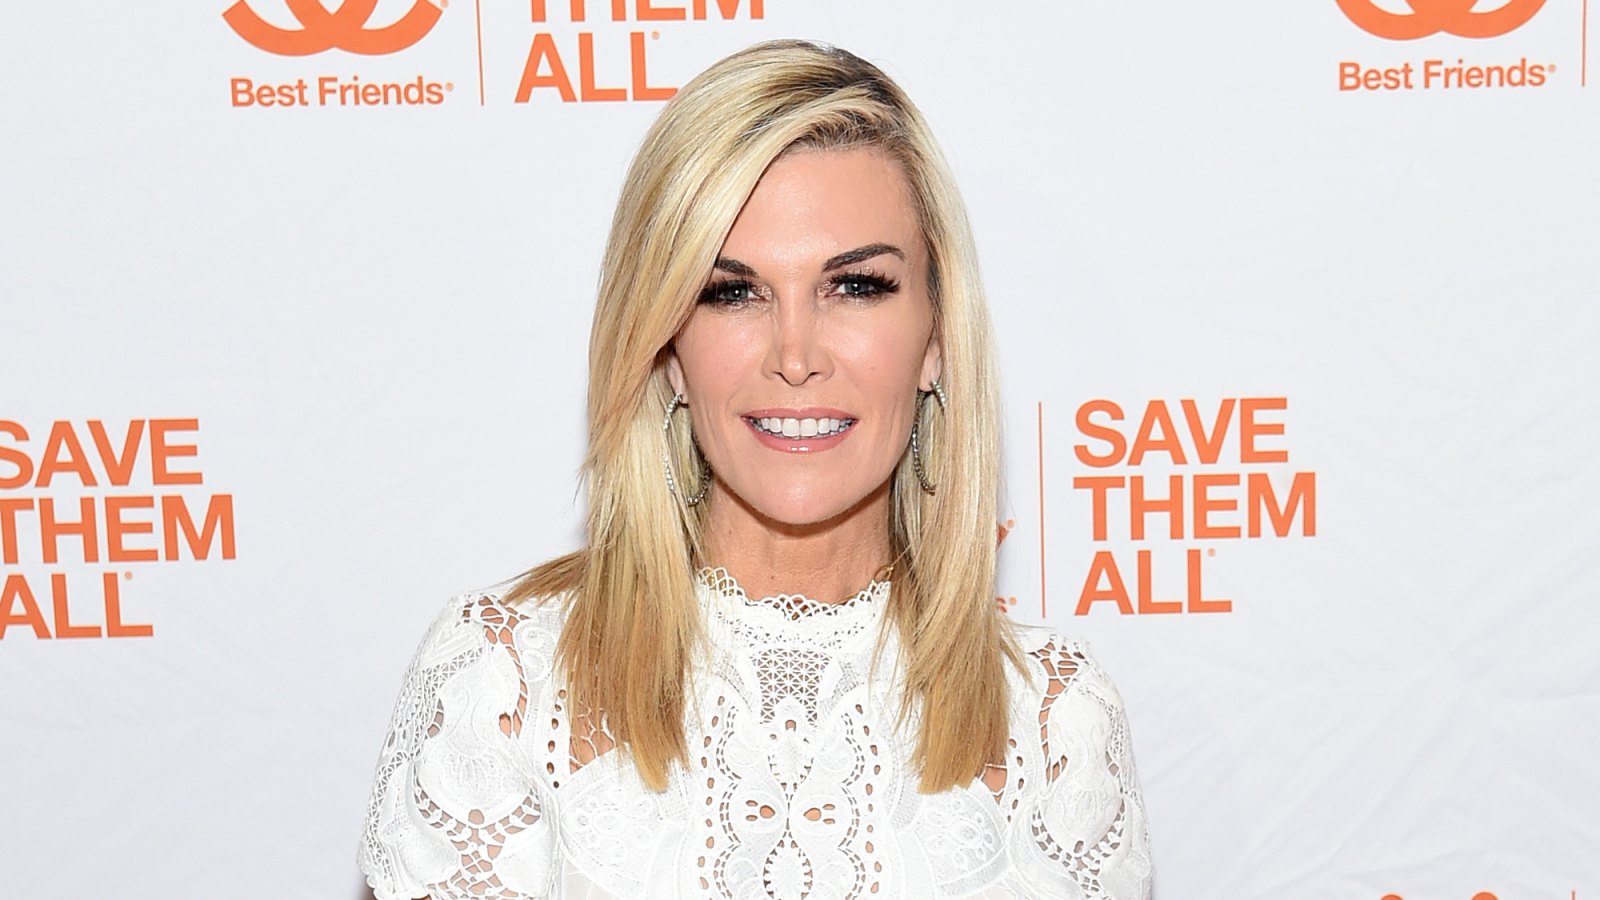 'RHONY' Alum Tinsley Mortimer Is Getting Married, Sets Wedding Date With Fiance Robert Bovard